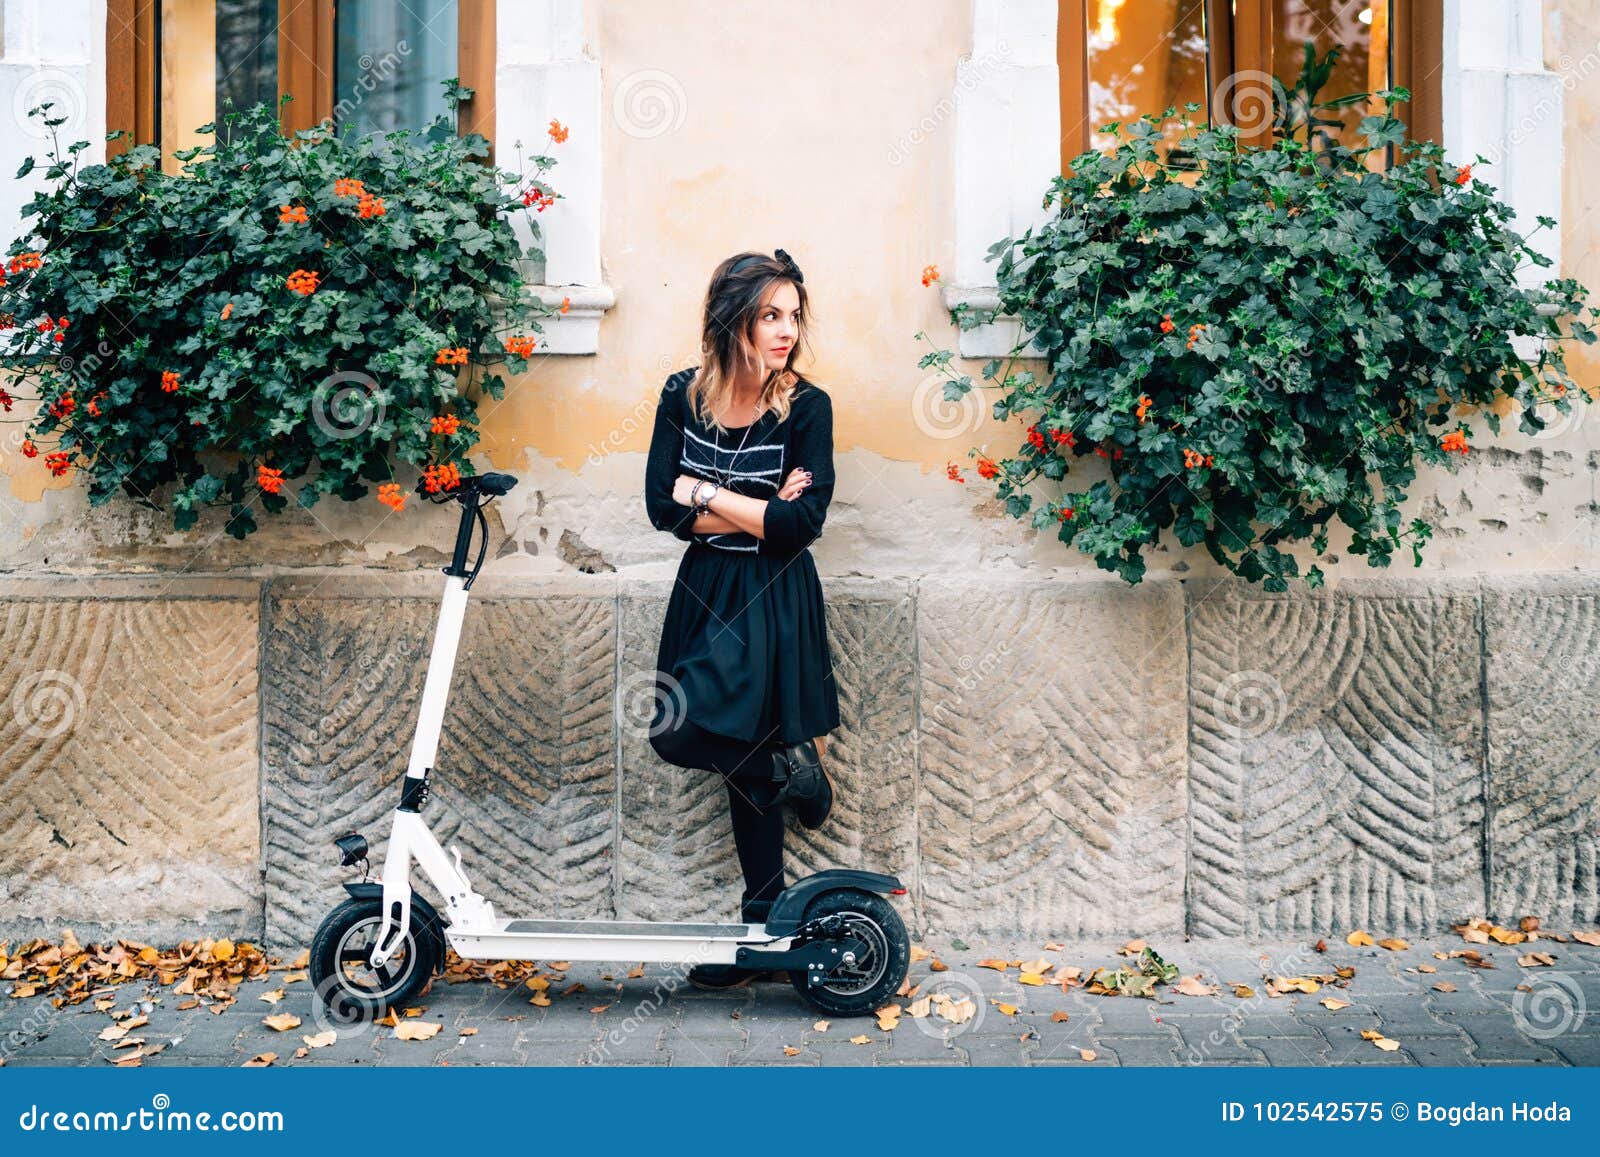 lifestyle details, happy girl with flowers in urban city enjoying the electric scooter. happiness and carefree concept